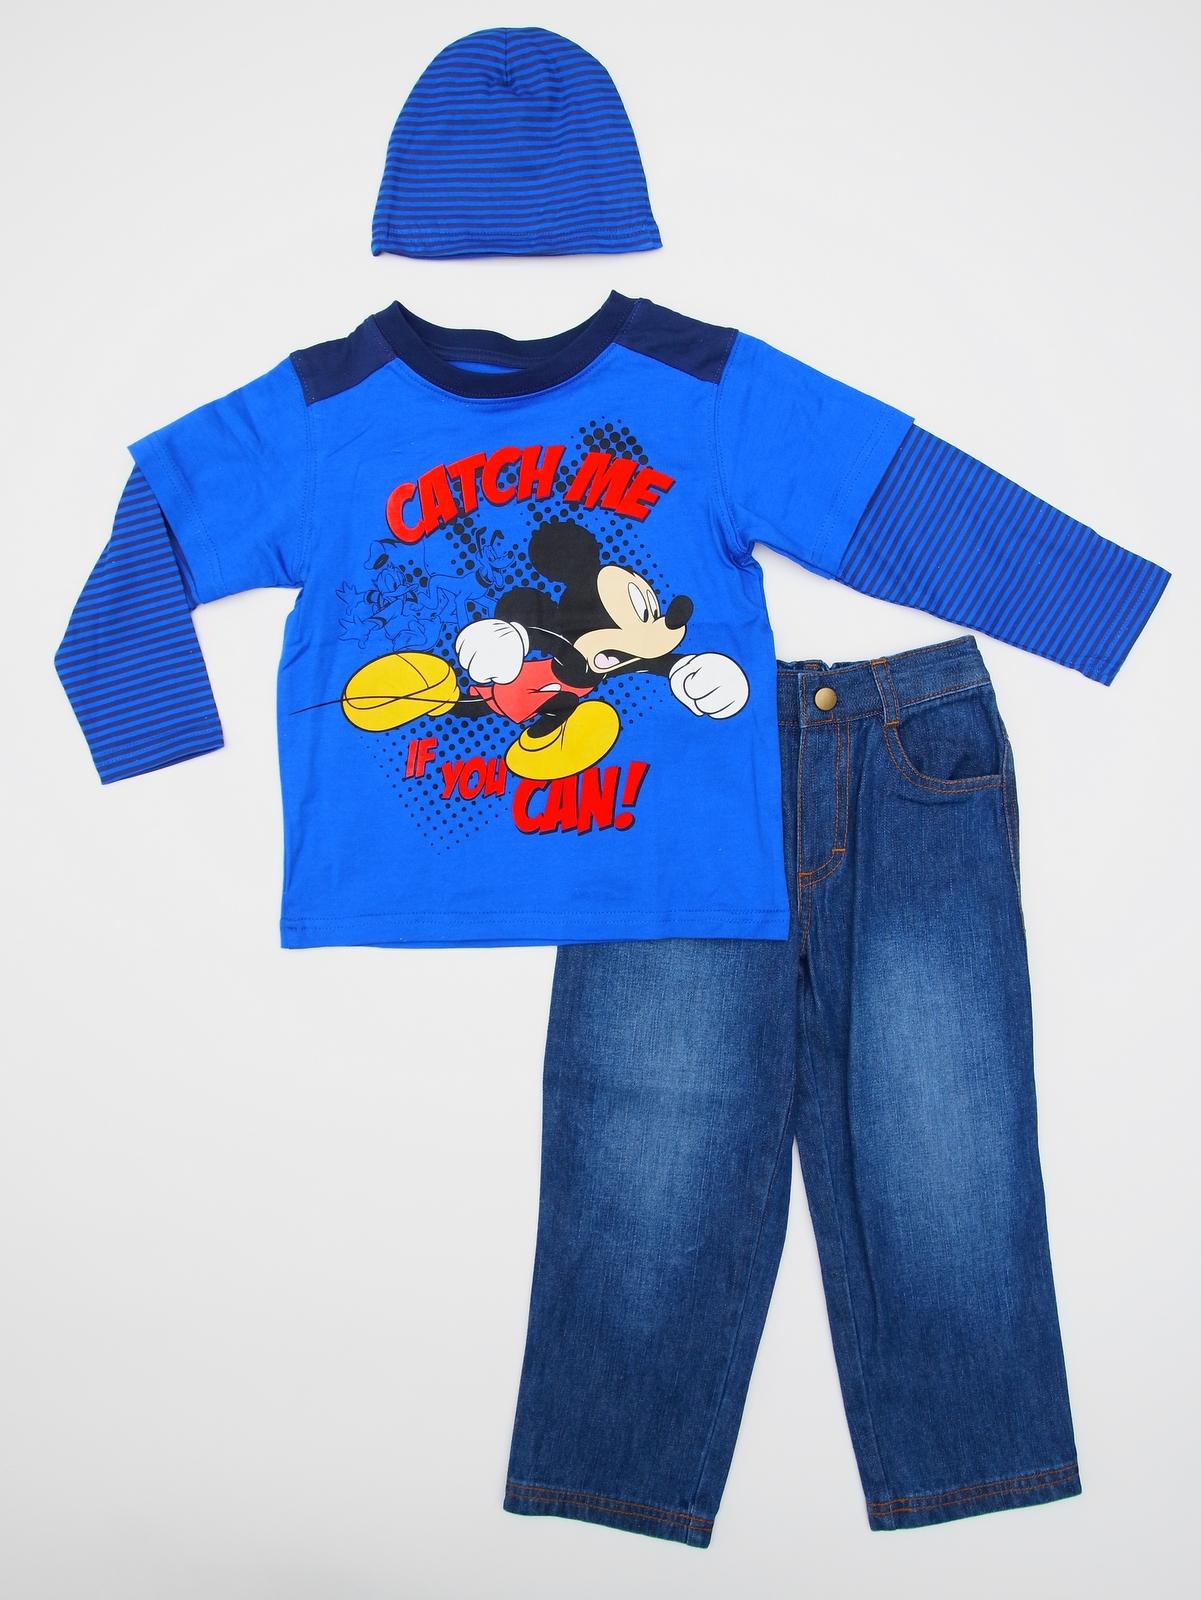 Disney Infant & Toddler Boy's Shirt  Jeans & Hat - Catch Me If You Can!